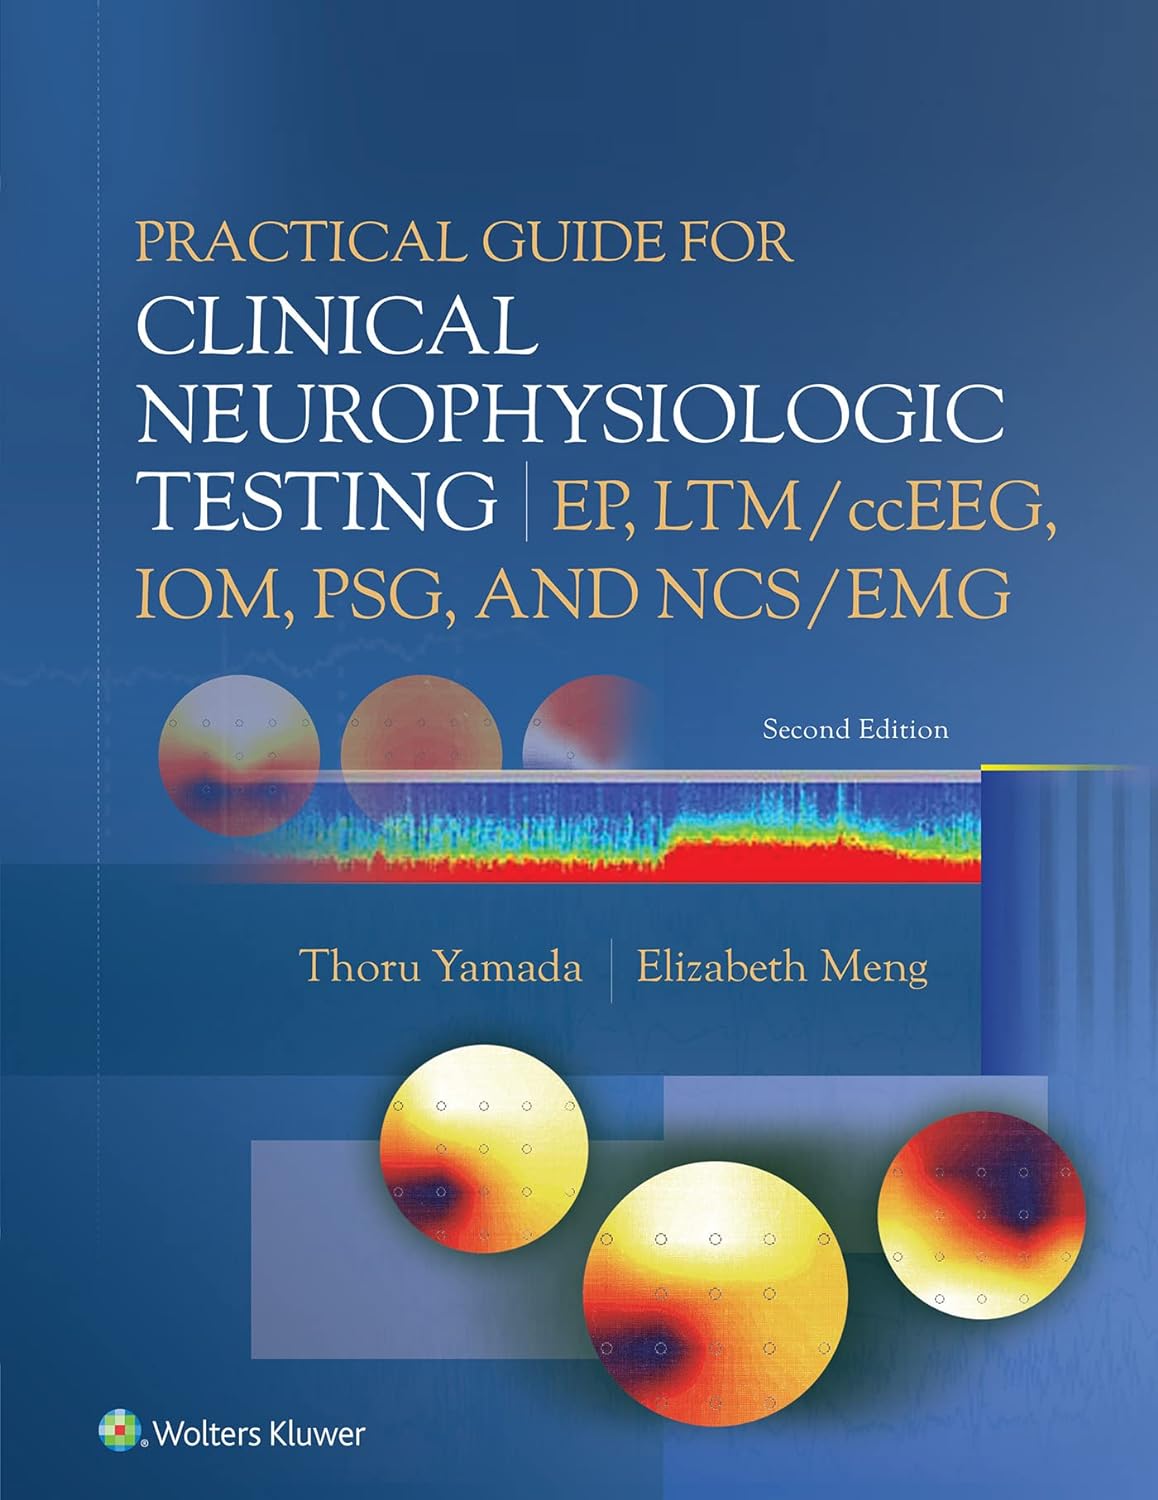 Practical Guide for Clinical Neurophysiologic Testing EP, LTM ccEEG, IOM, PSG, and NCS EMG 2nd Edition